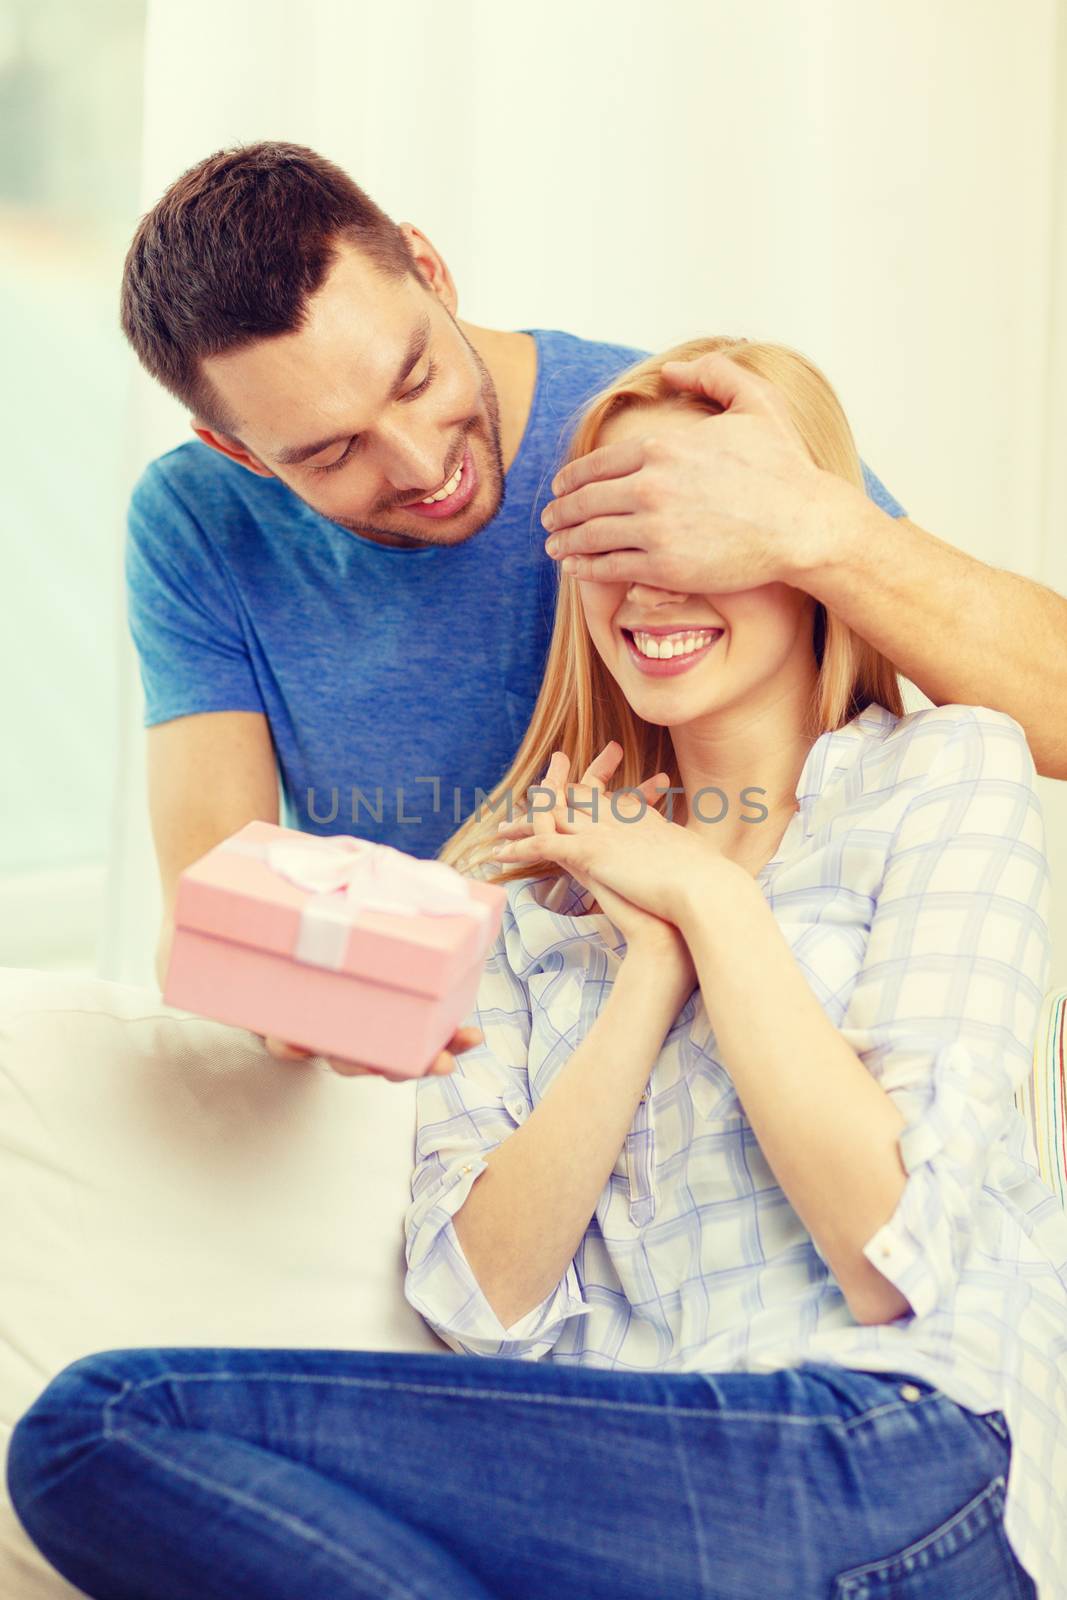 smiling man surprises his girlfriend with present by dolgachov